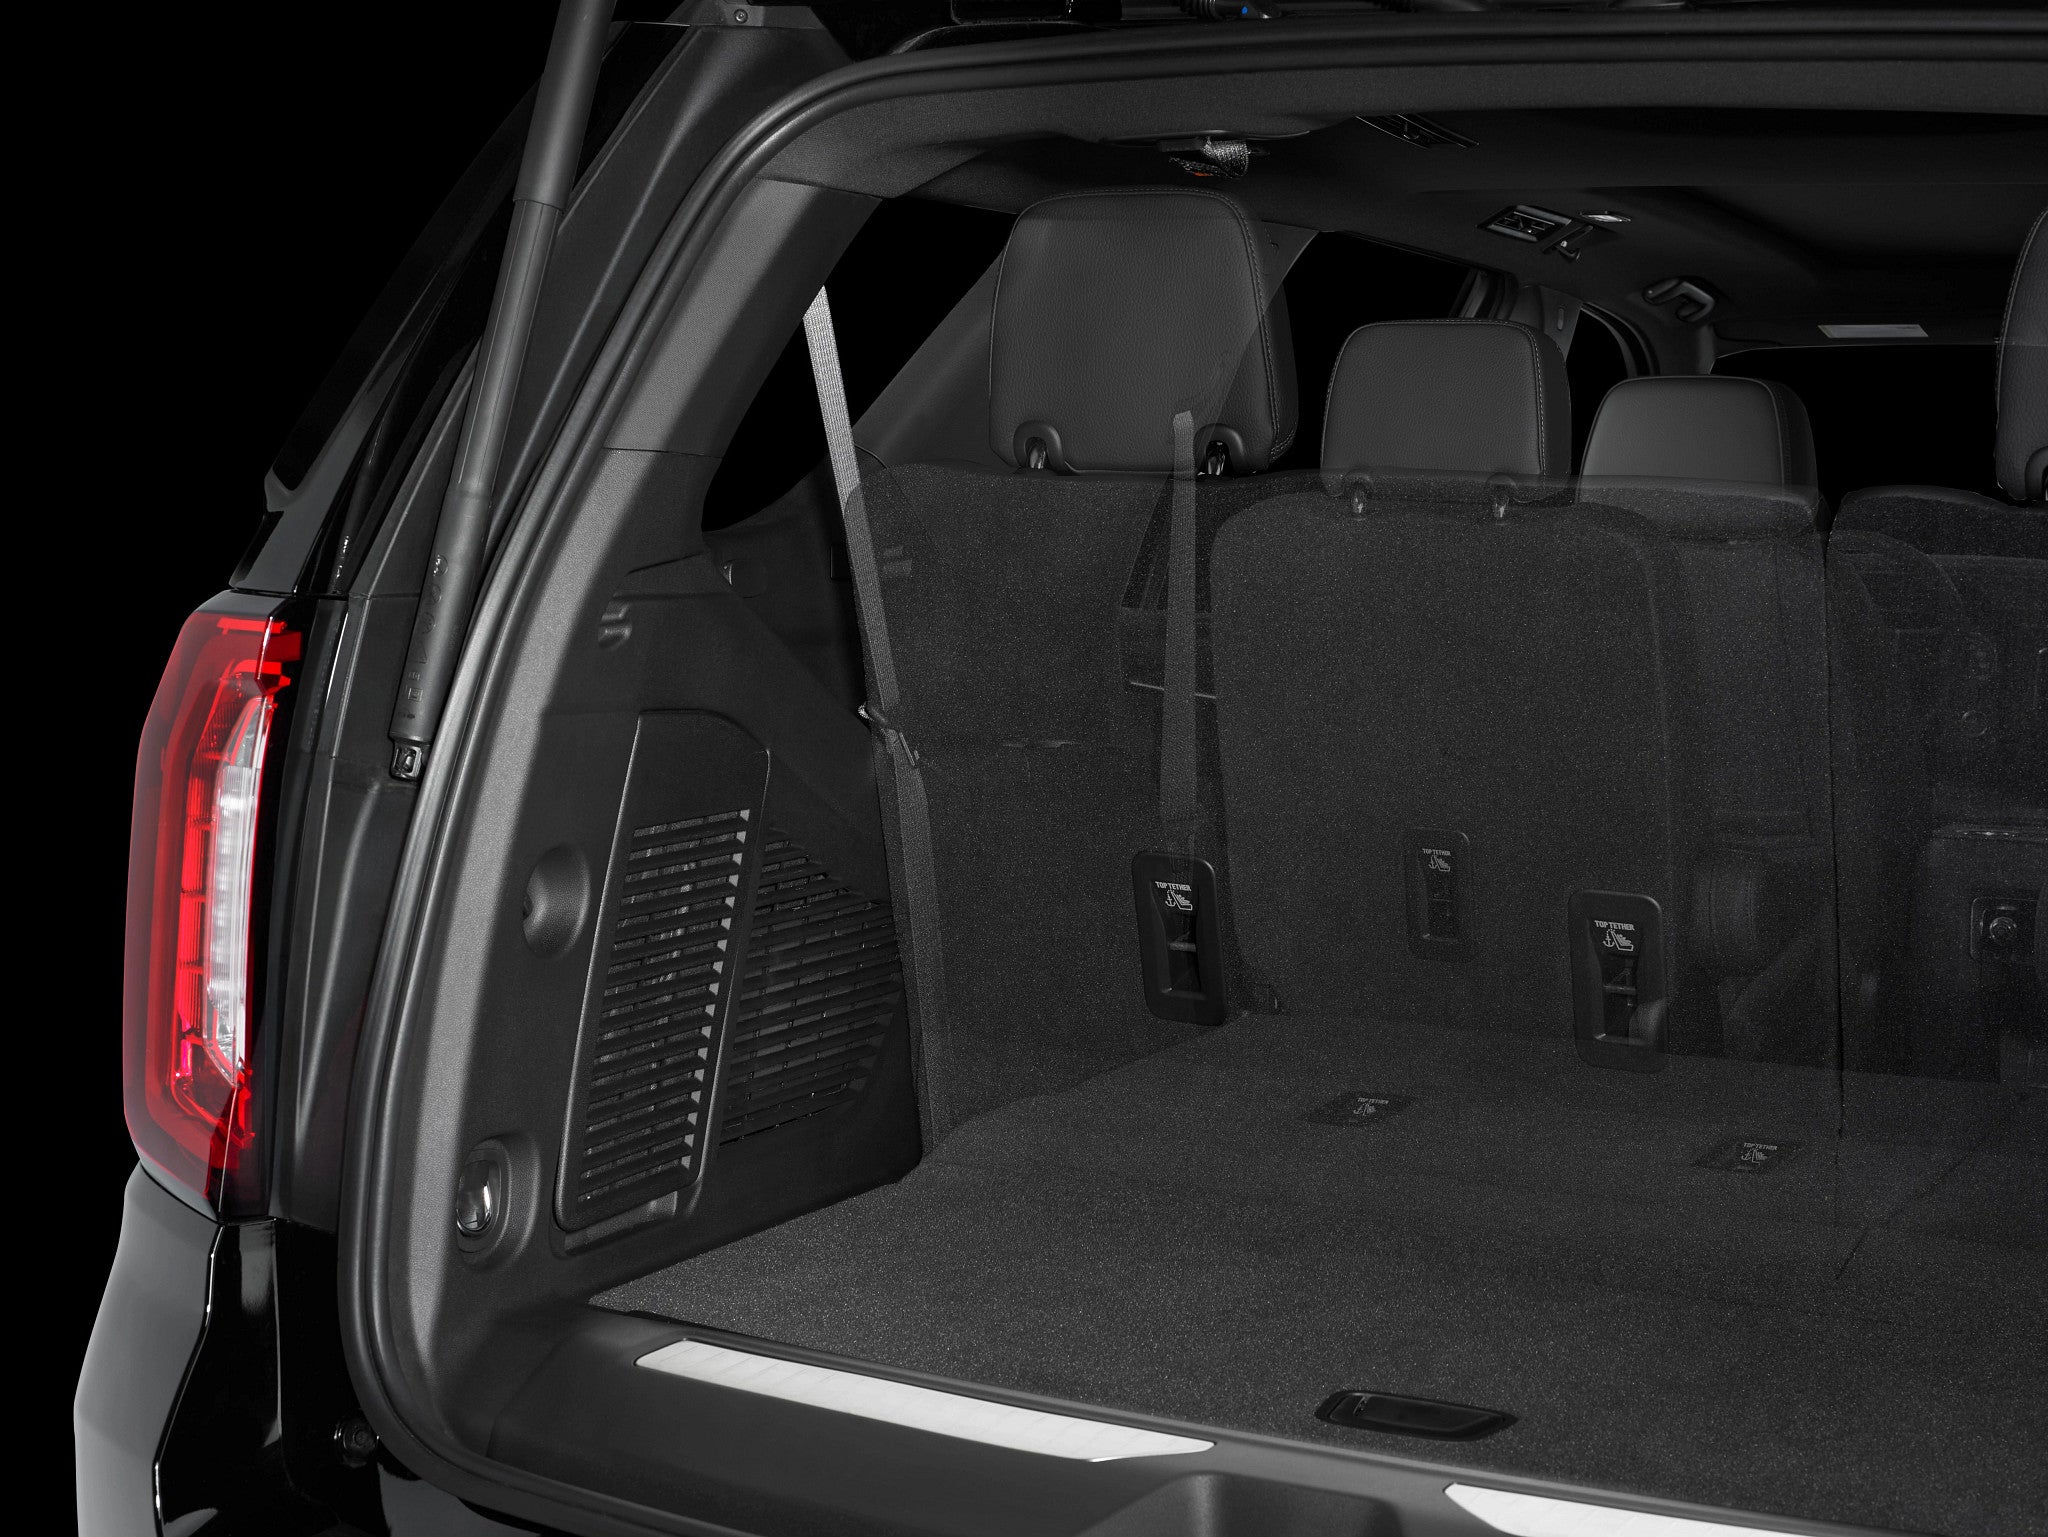 SB-GM-5GSUV/10TW3 installed in cargo area of vehicle